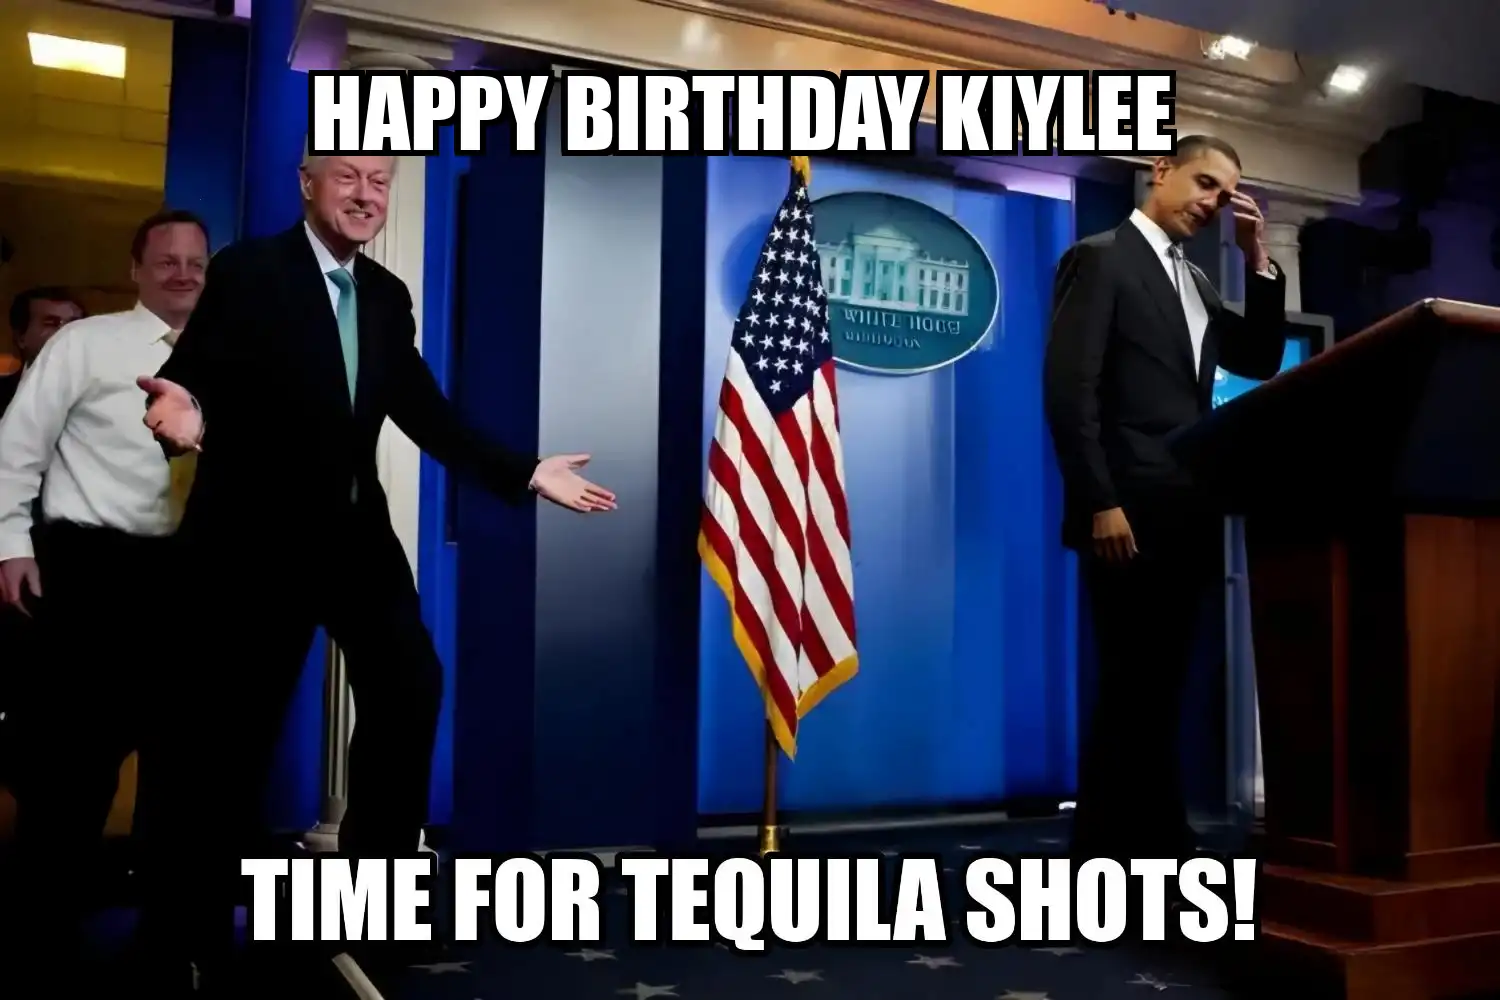 Happy Birthday Kiylee Time For Tequila Shots Memes